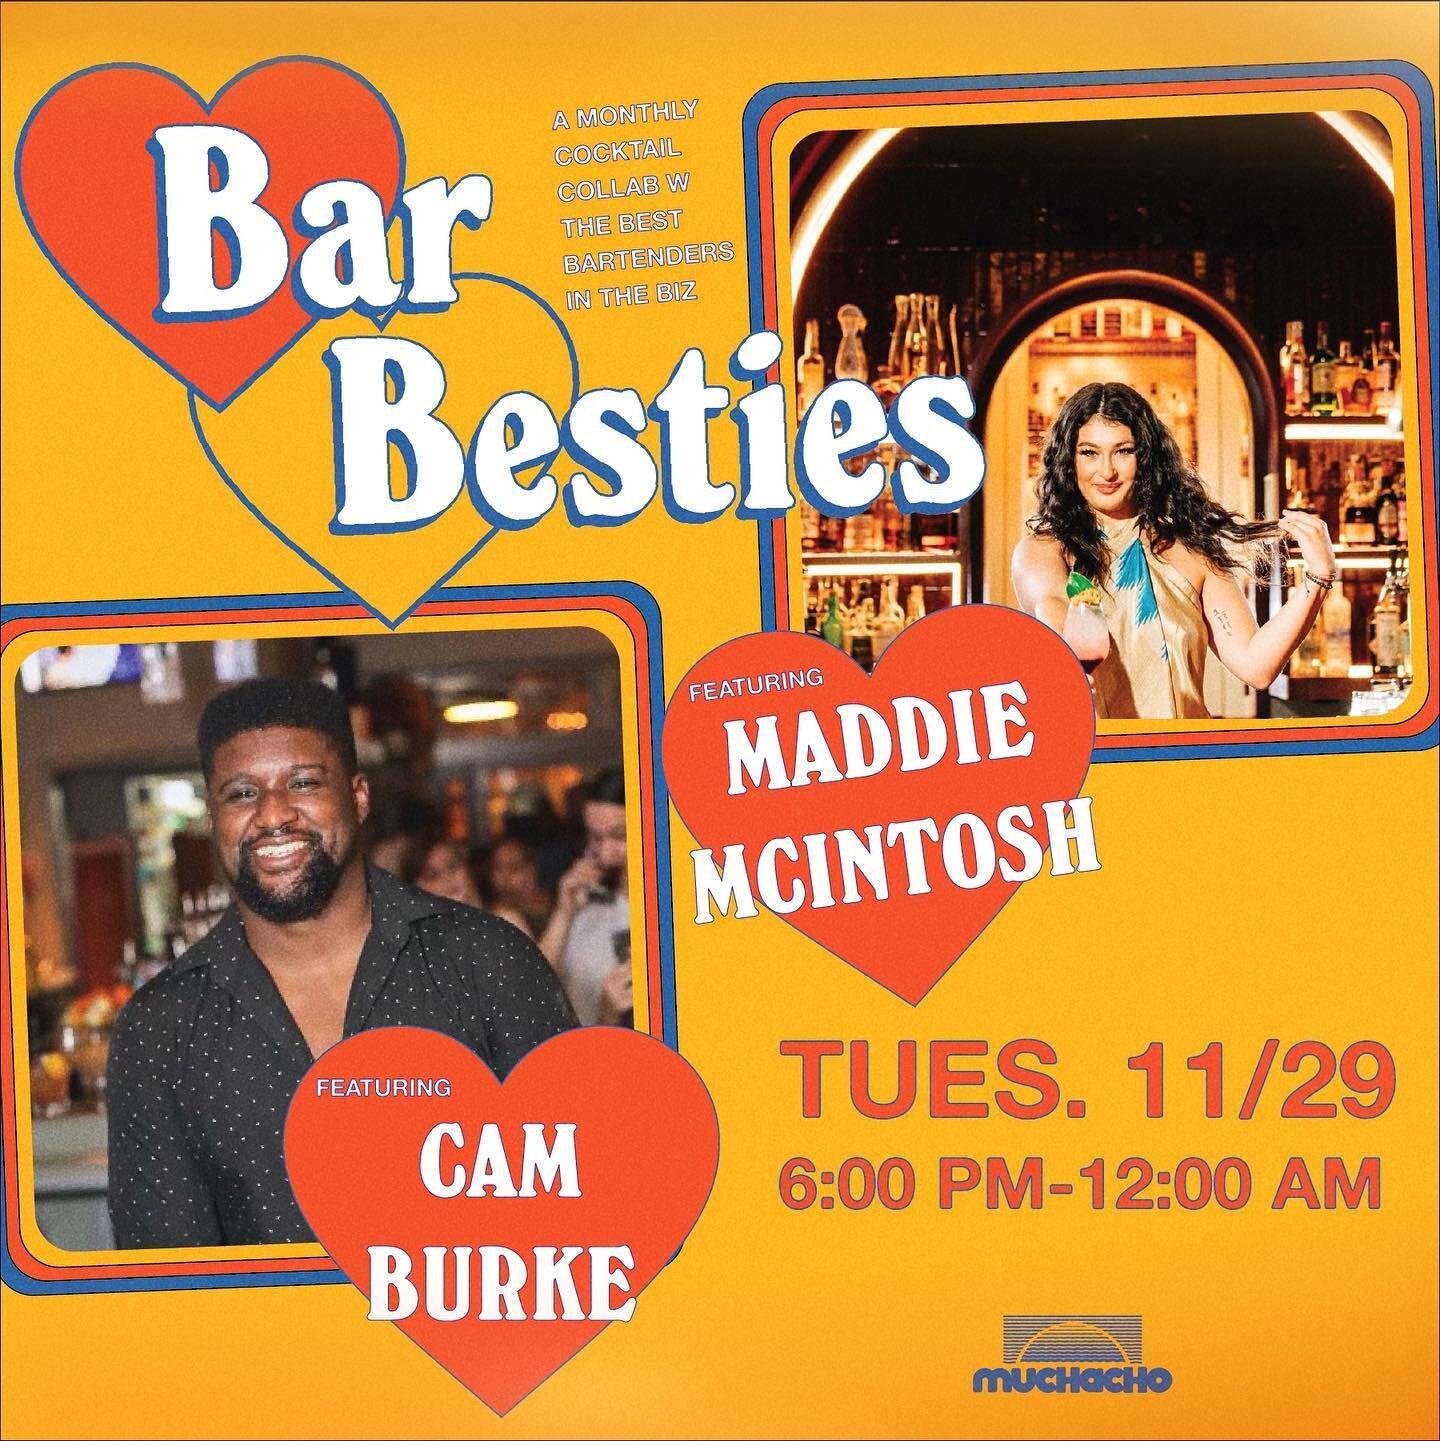 What&rsquo;s better than doing what you love with your besties? Nothing, literally n͟o͟t͟h͟i͟n͟g.
⠀
Next Tuesday (11/29) from 6p to 12a we&rsquo;re hosting Cam Burke @camthebadguy and Maddie Mcintosh @maddmaccc for this month&rsquo;s 𝐁𝐚𝐫 𝐁𝐞𝐬𝐭?